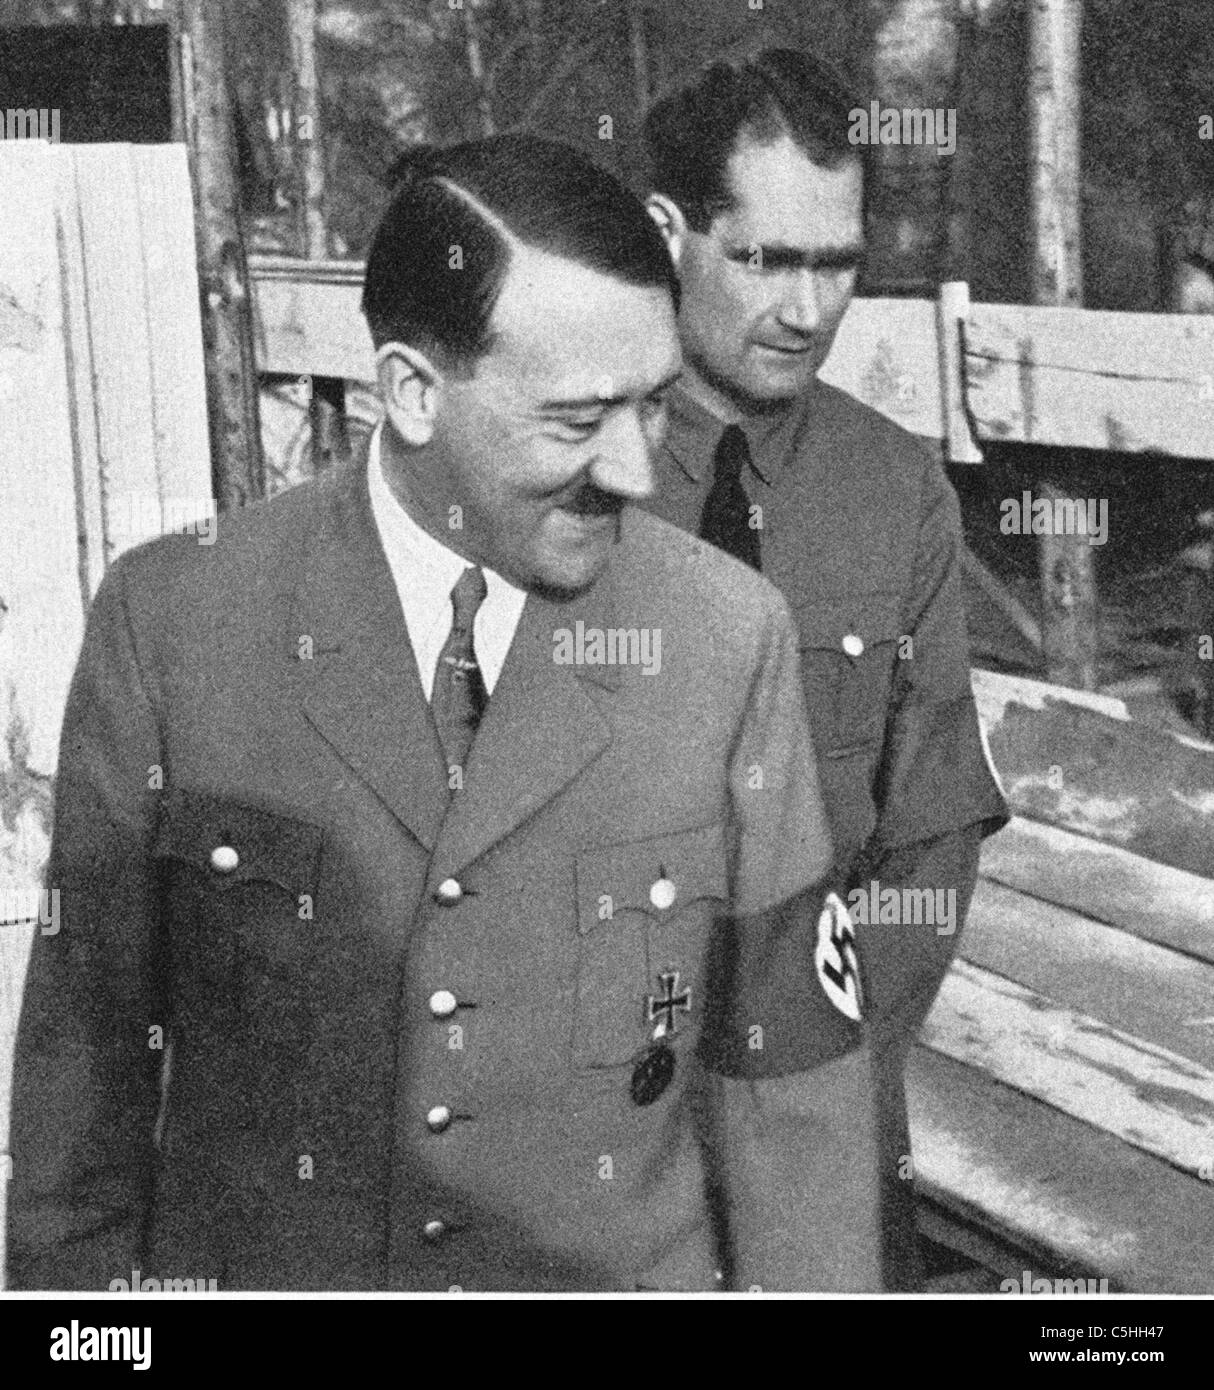 Adolf Hitler with Rudolf Hess - Hitler's war time deputy. From the archives of Press Portrait Service Stock Photo